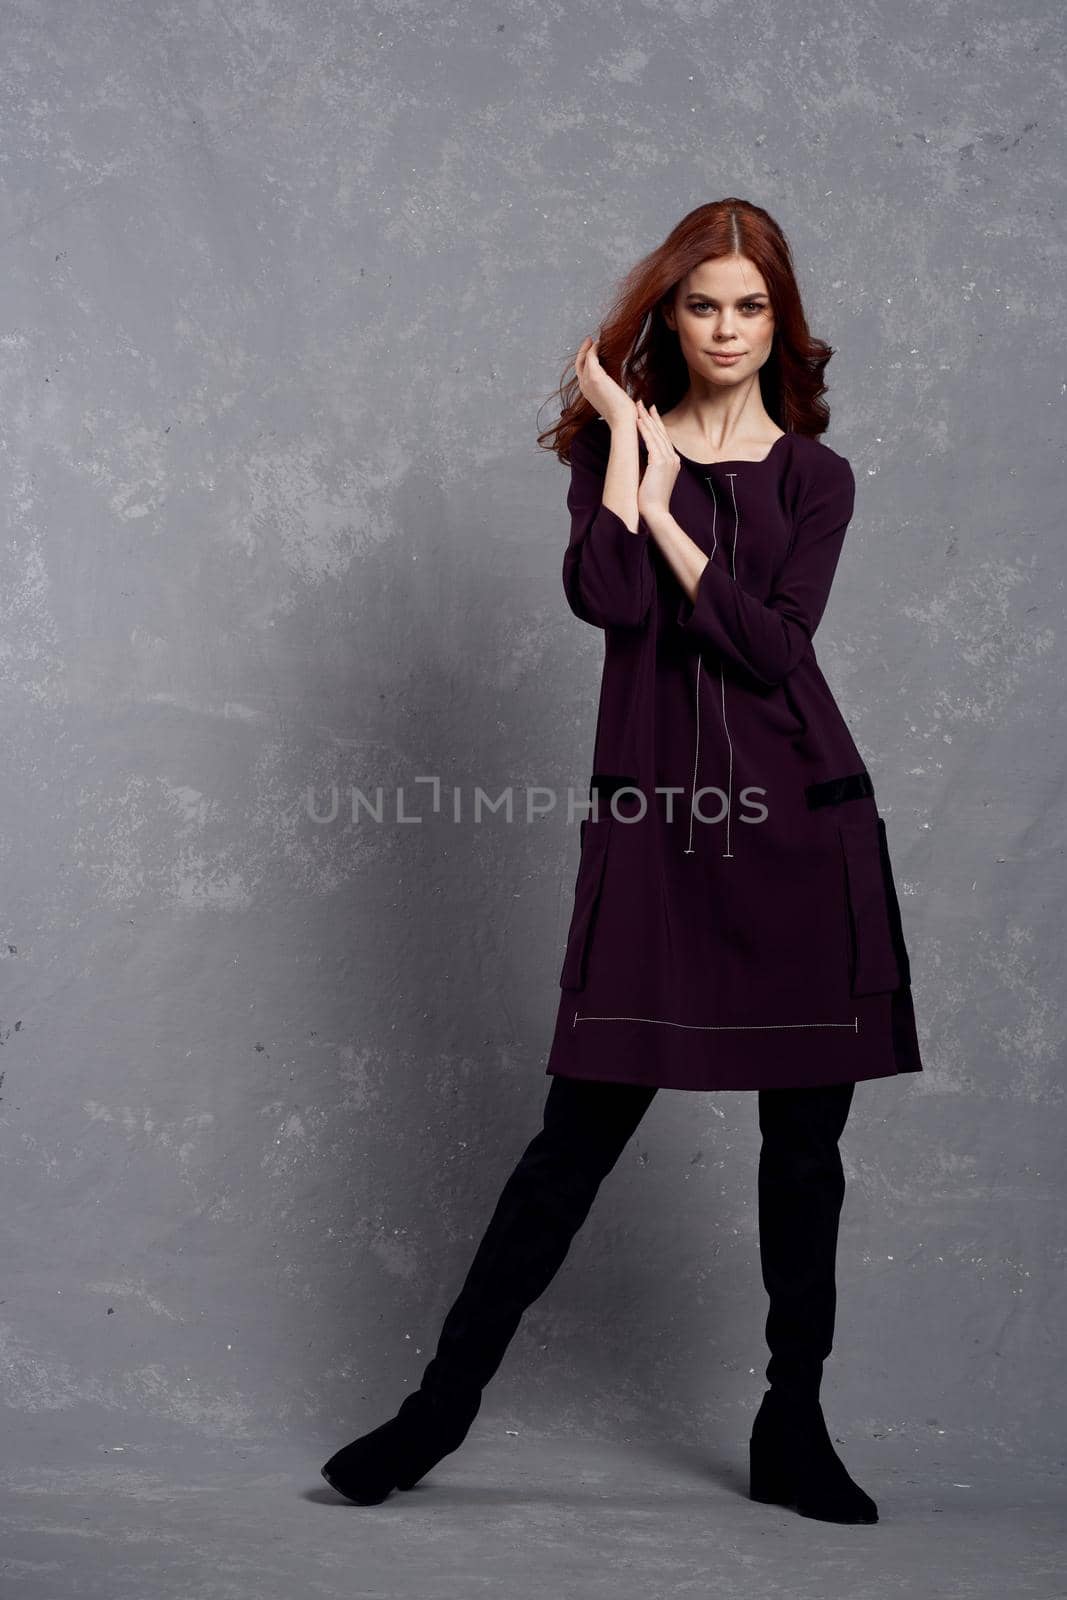 woman with red hair posing fashionable clothing elegant style by Vichizh